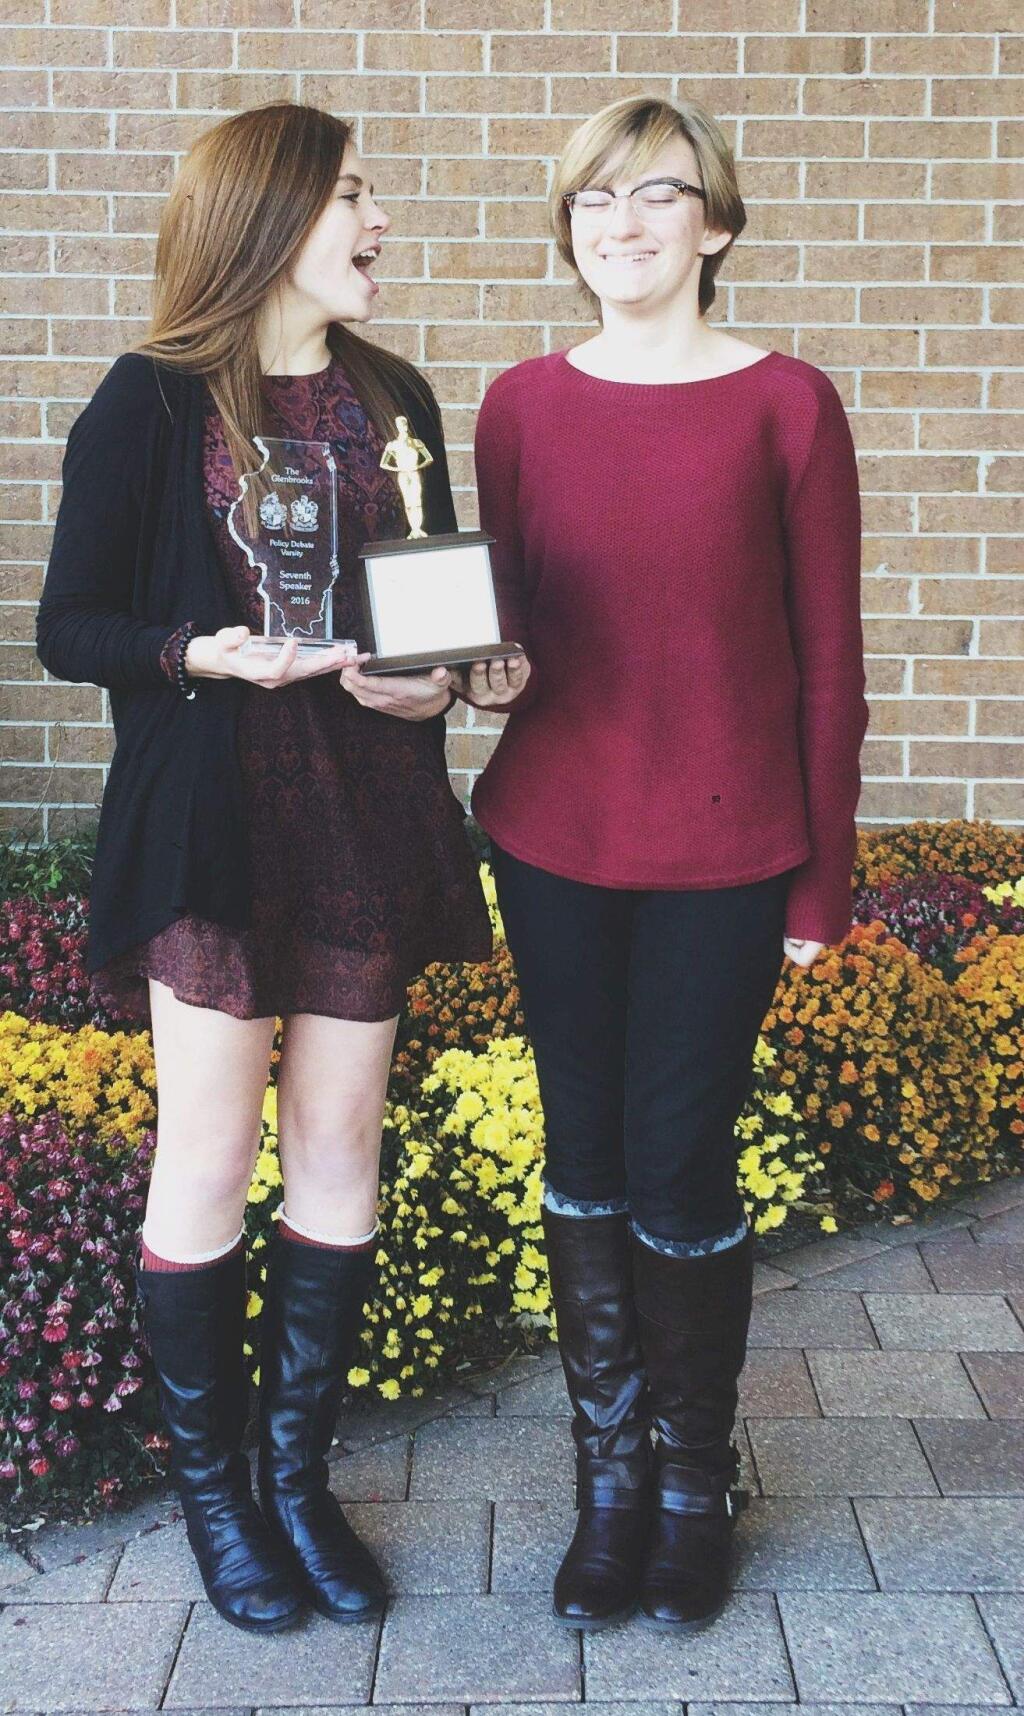 LISSA FERREIRA PHOTOThe St. Vincent de Paul debate team of Julia Hunter and Emma Page jplaced in the finals at the Alta Silver and Back Tournament in Utah.